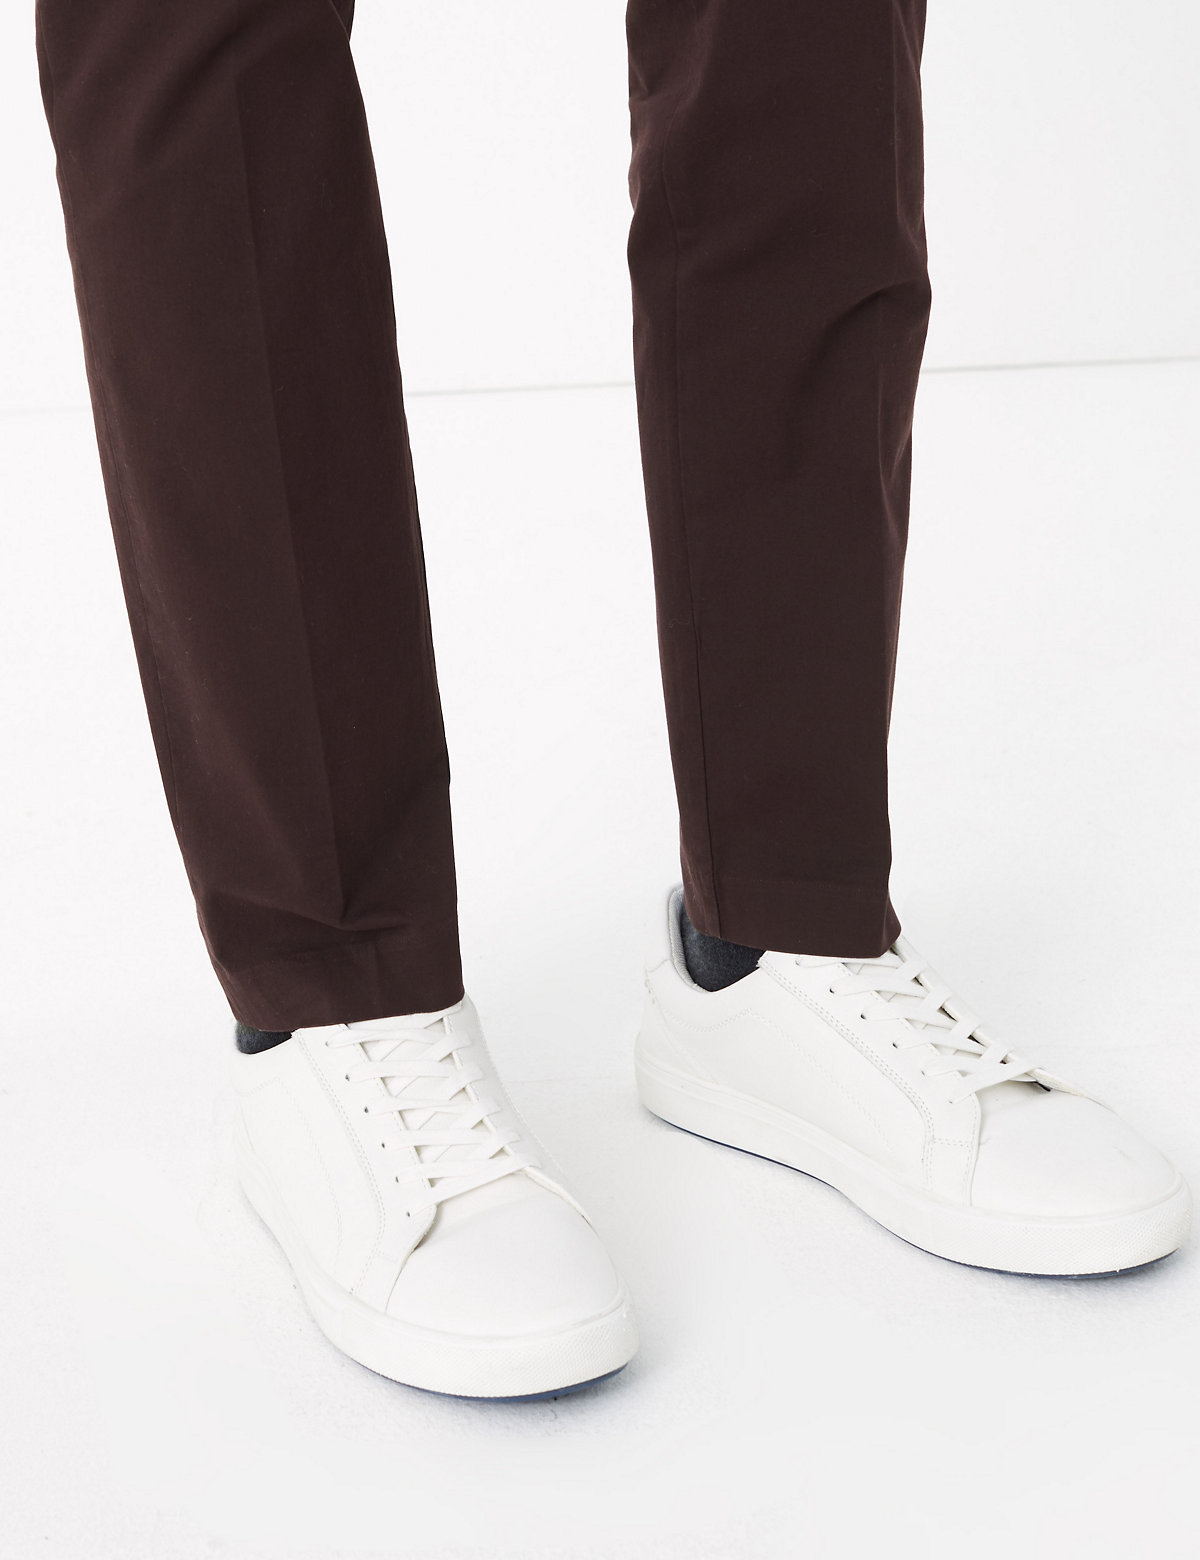 Skinny Fit Smart Chinos